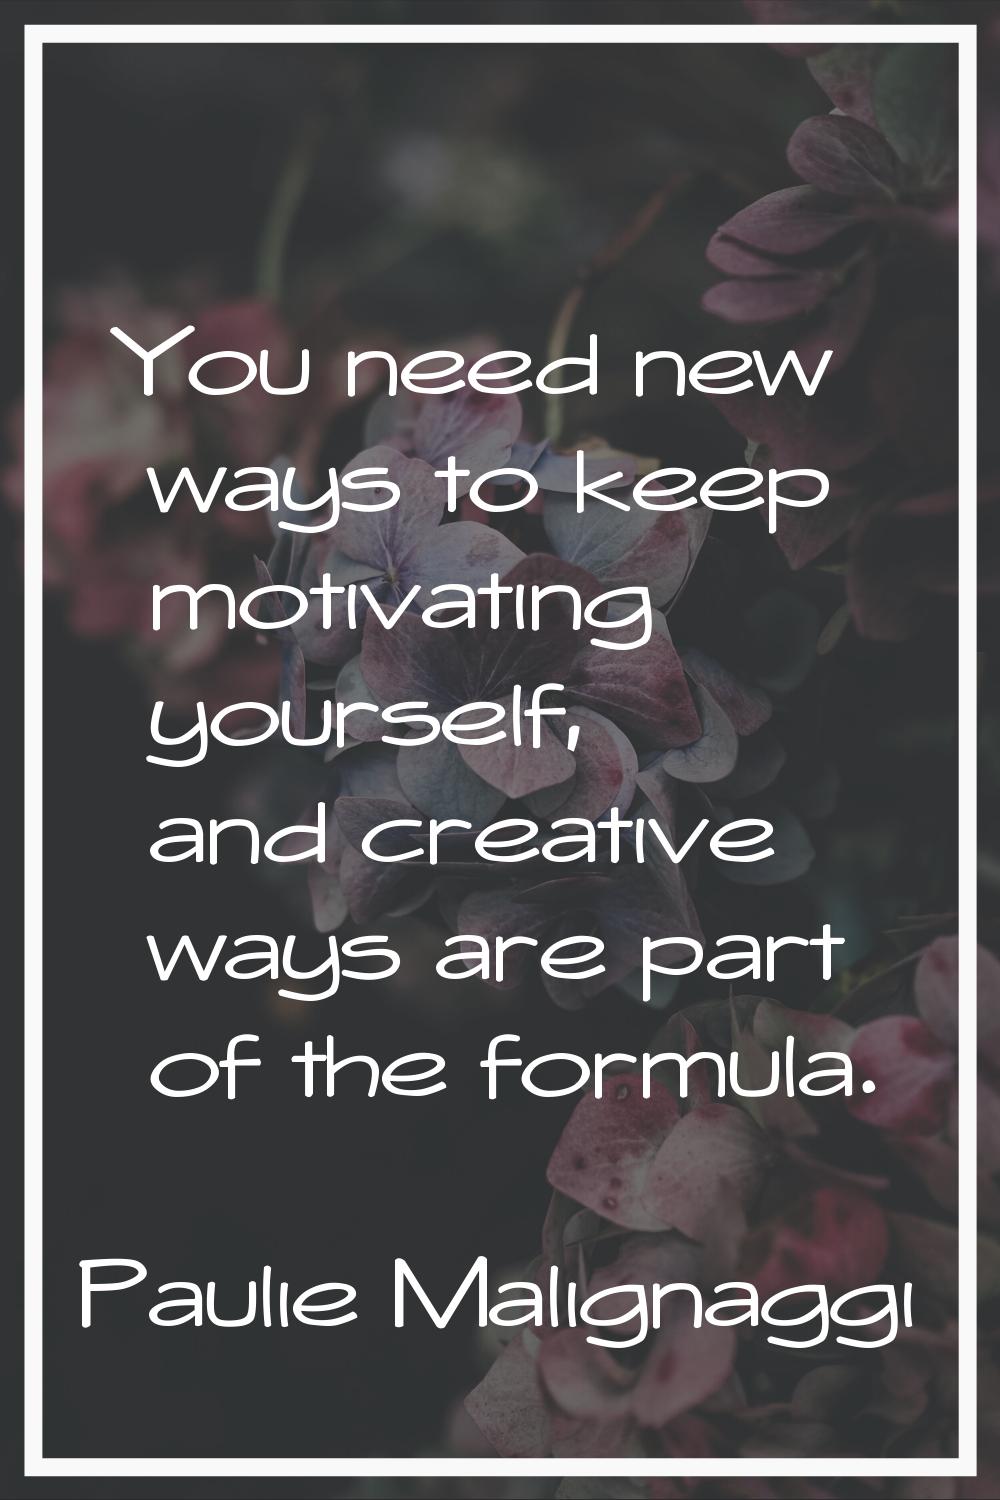 You need new ways to keep motivating yourself, and creative ways are part of the formula.